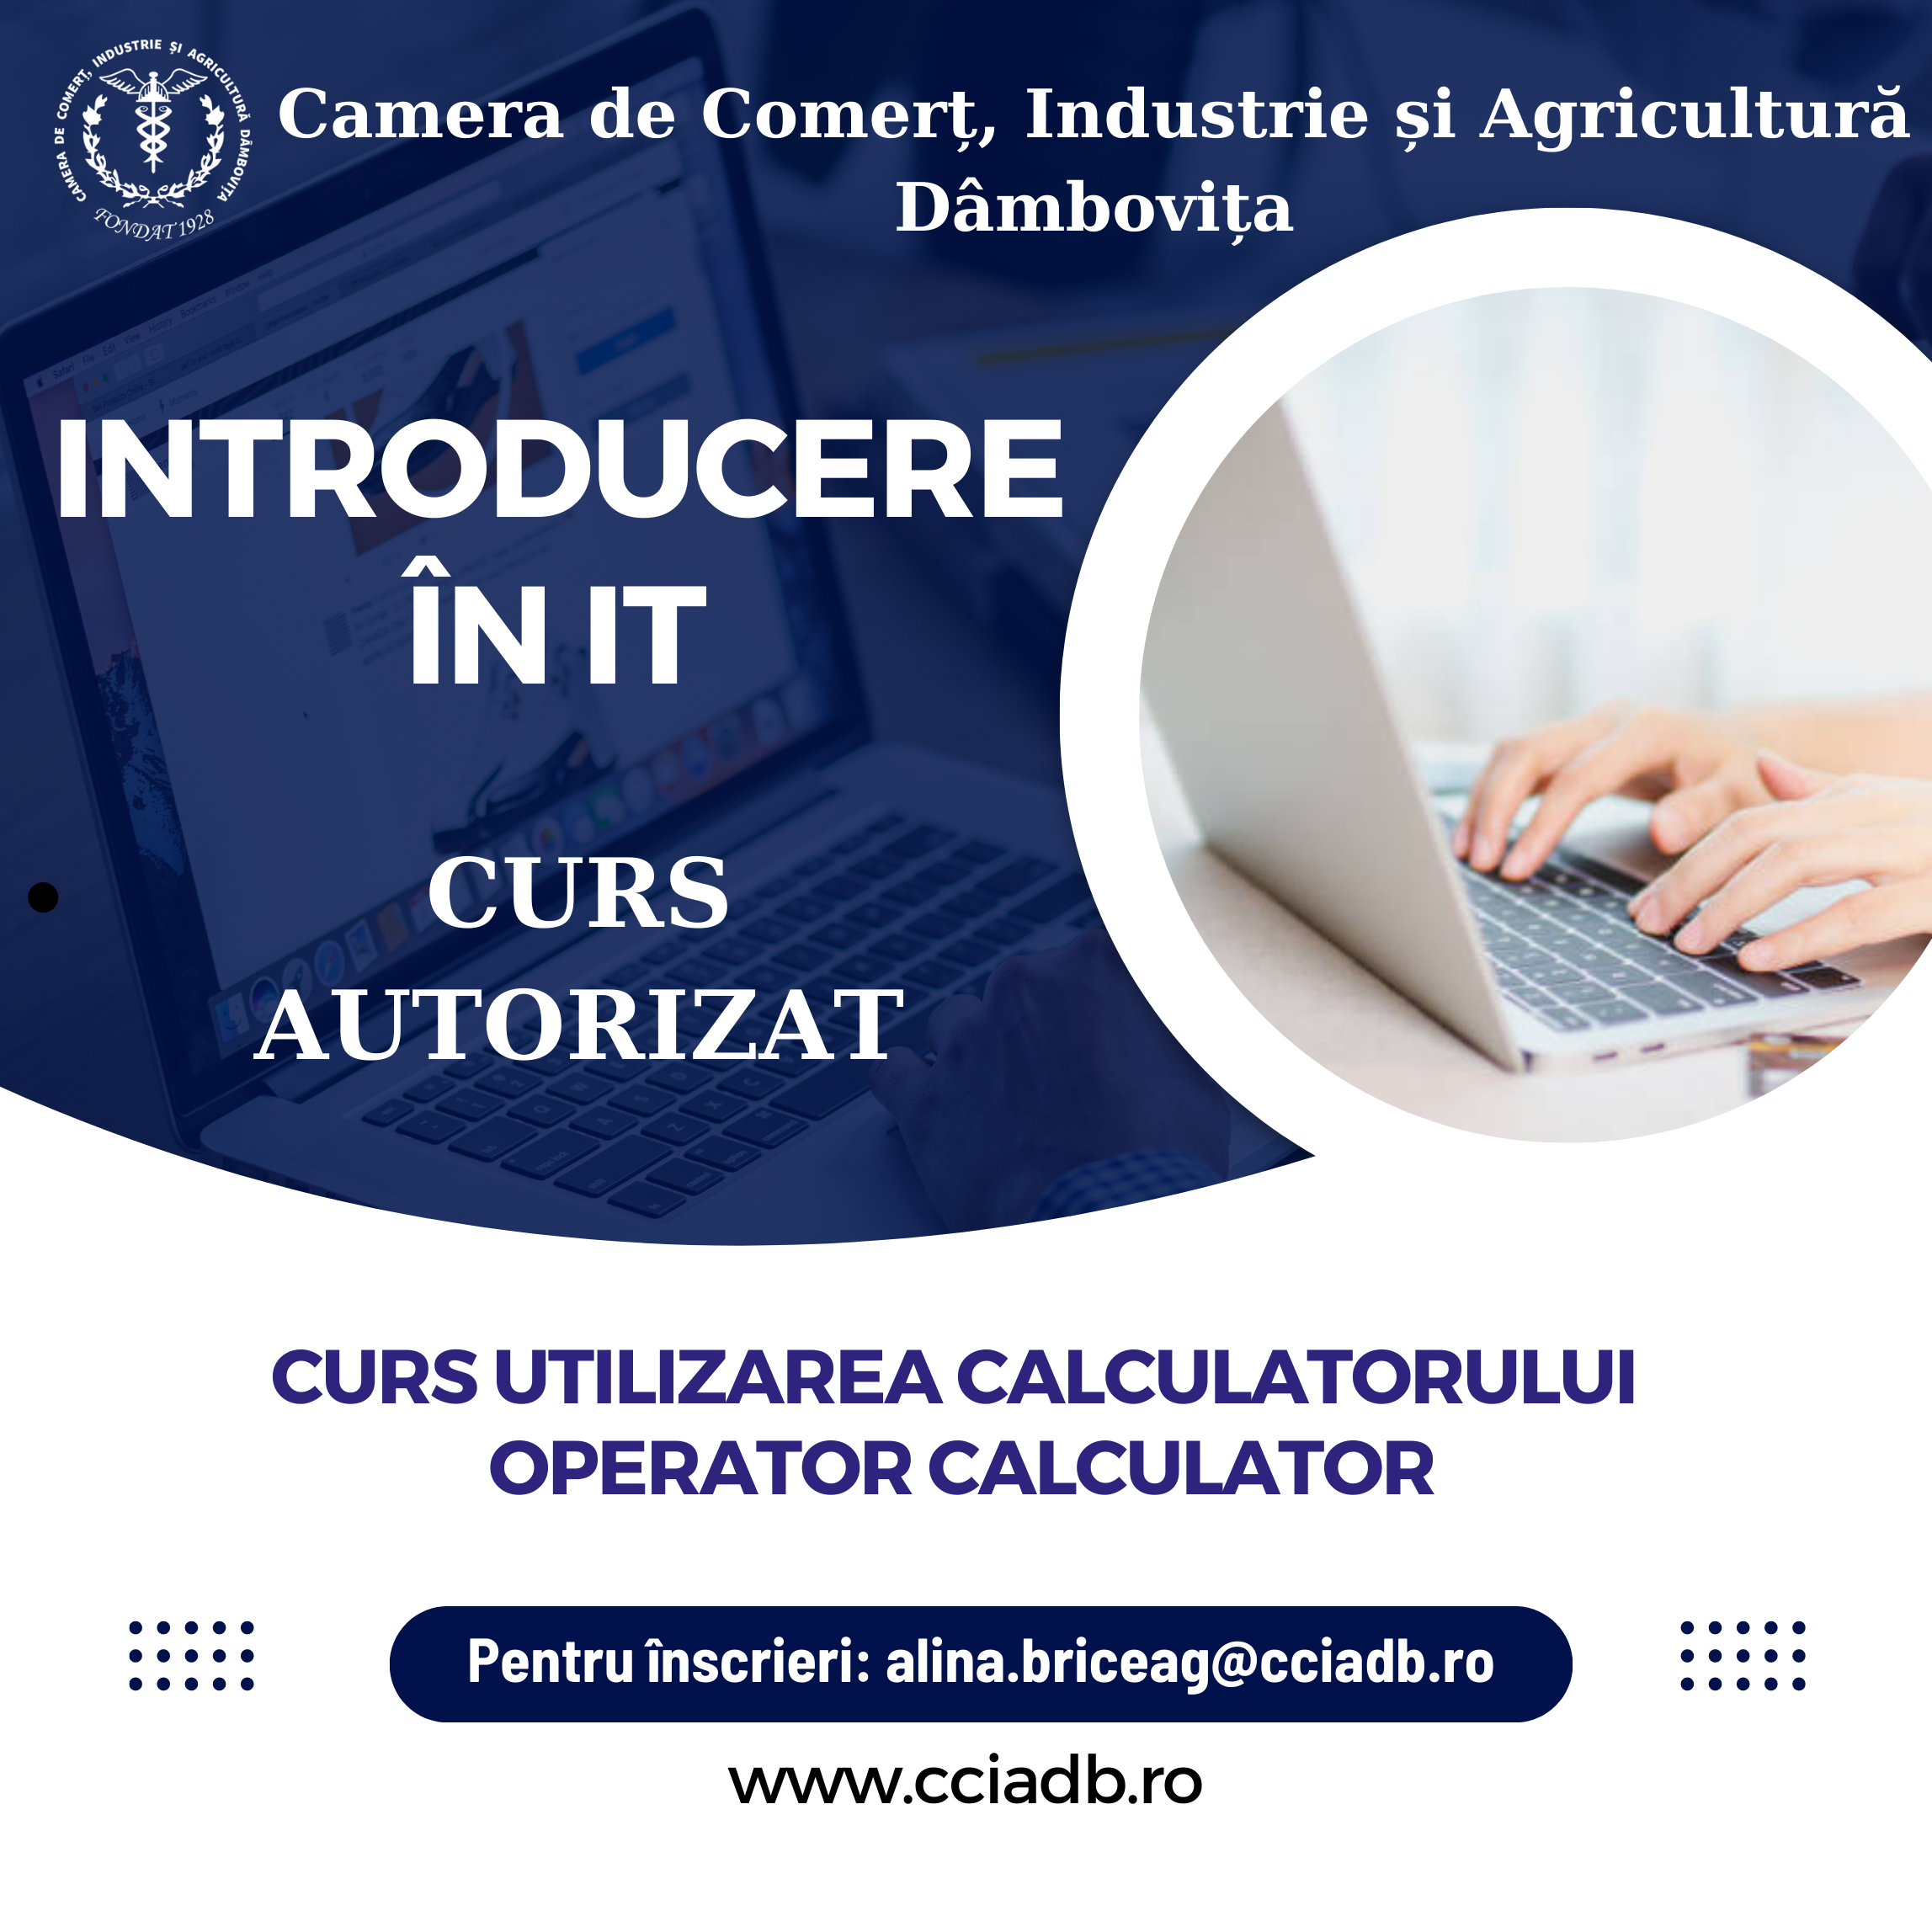 You are currently viewing CURS OPERATOR INTRODUCERE, VALIDARE ȘI PRELUCRARE DATE